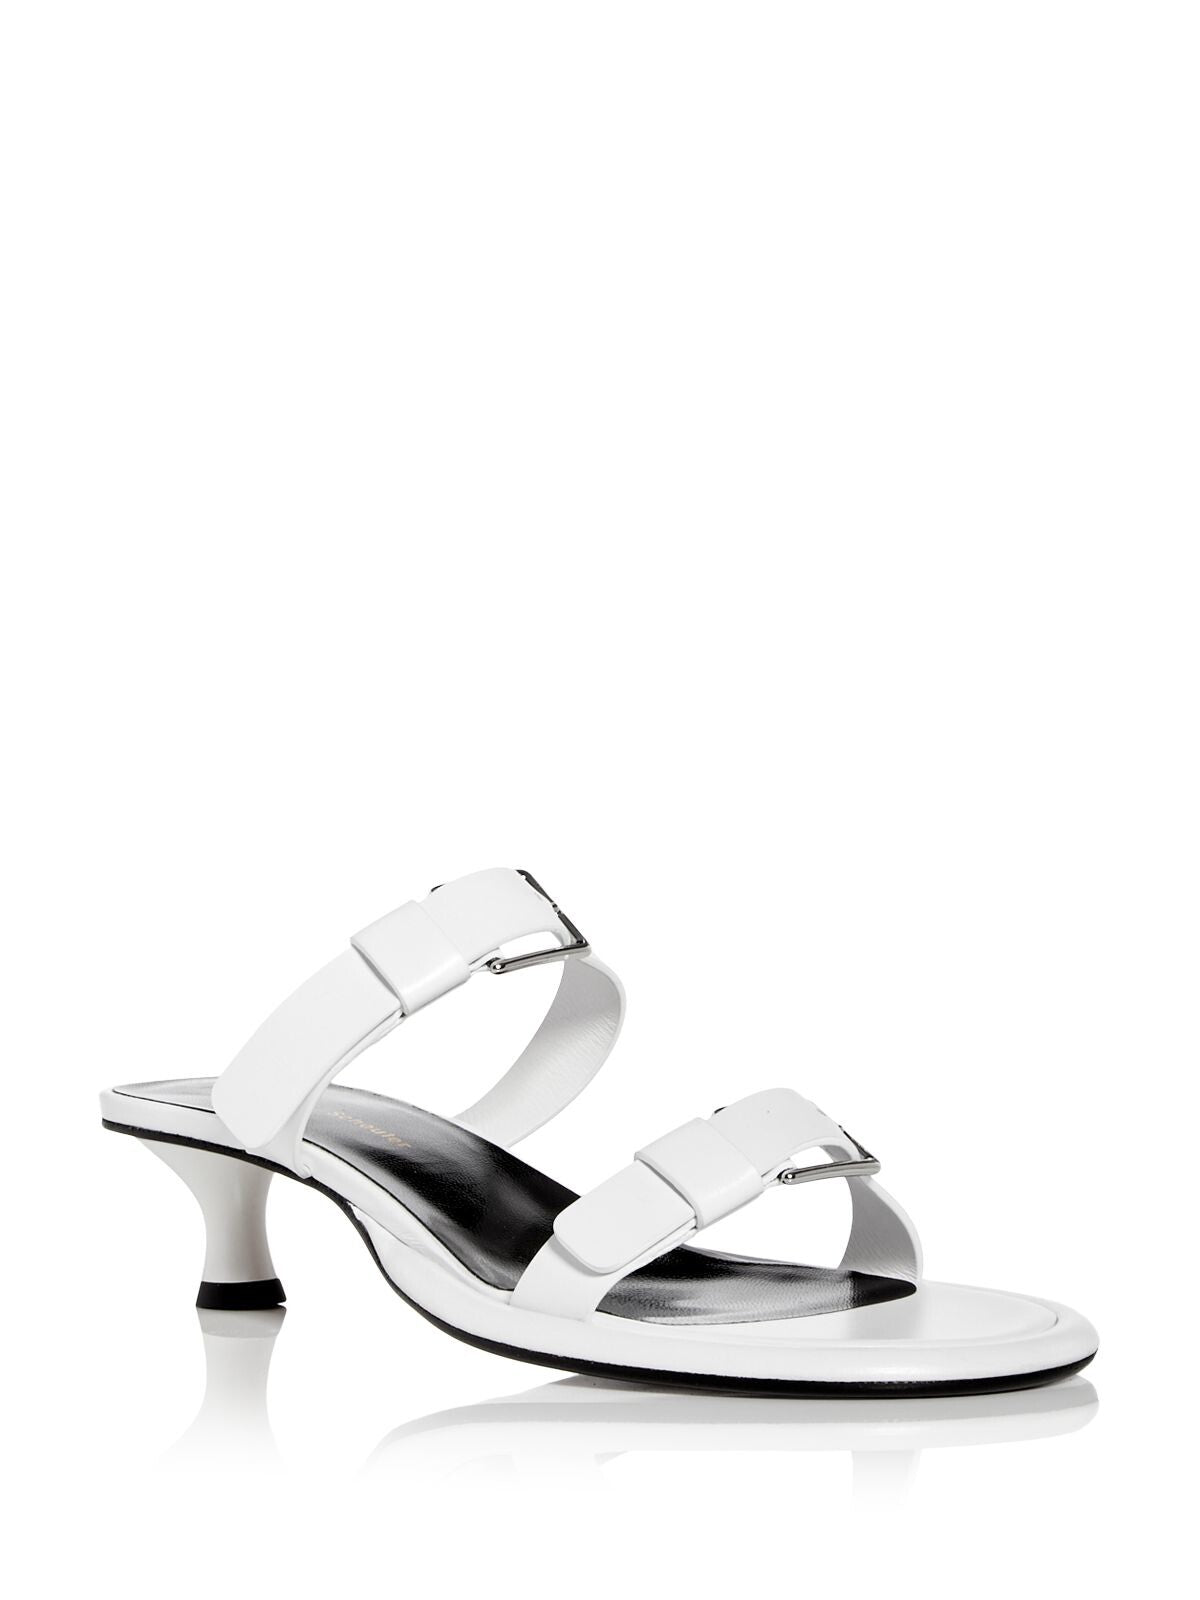 PROENZA SCHOULER Womens White Buckle Accent Pipe Round Toe Kitten Heel Slip On Leather Heeled Sandal 38